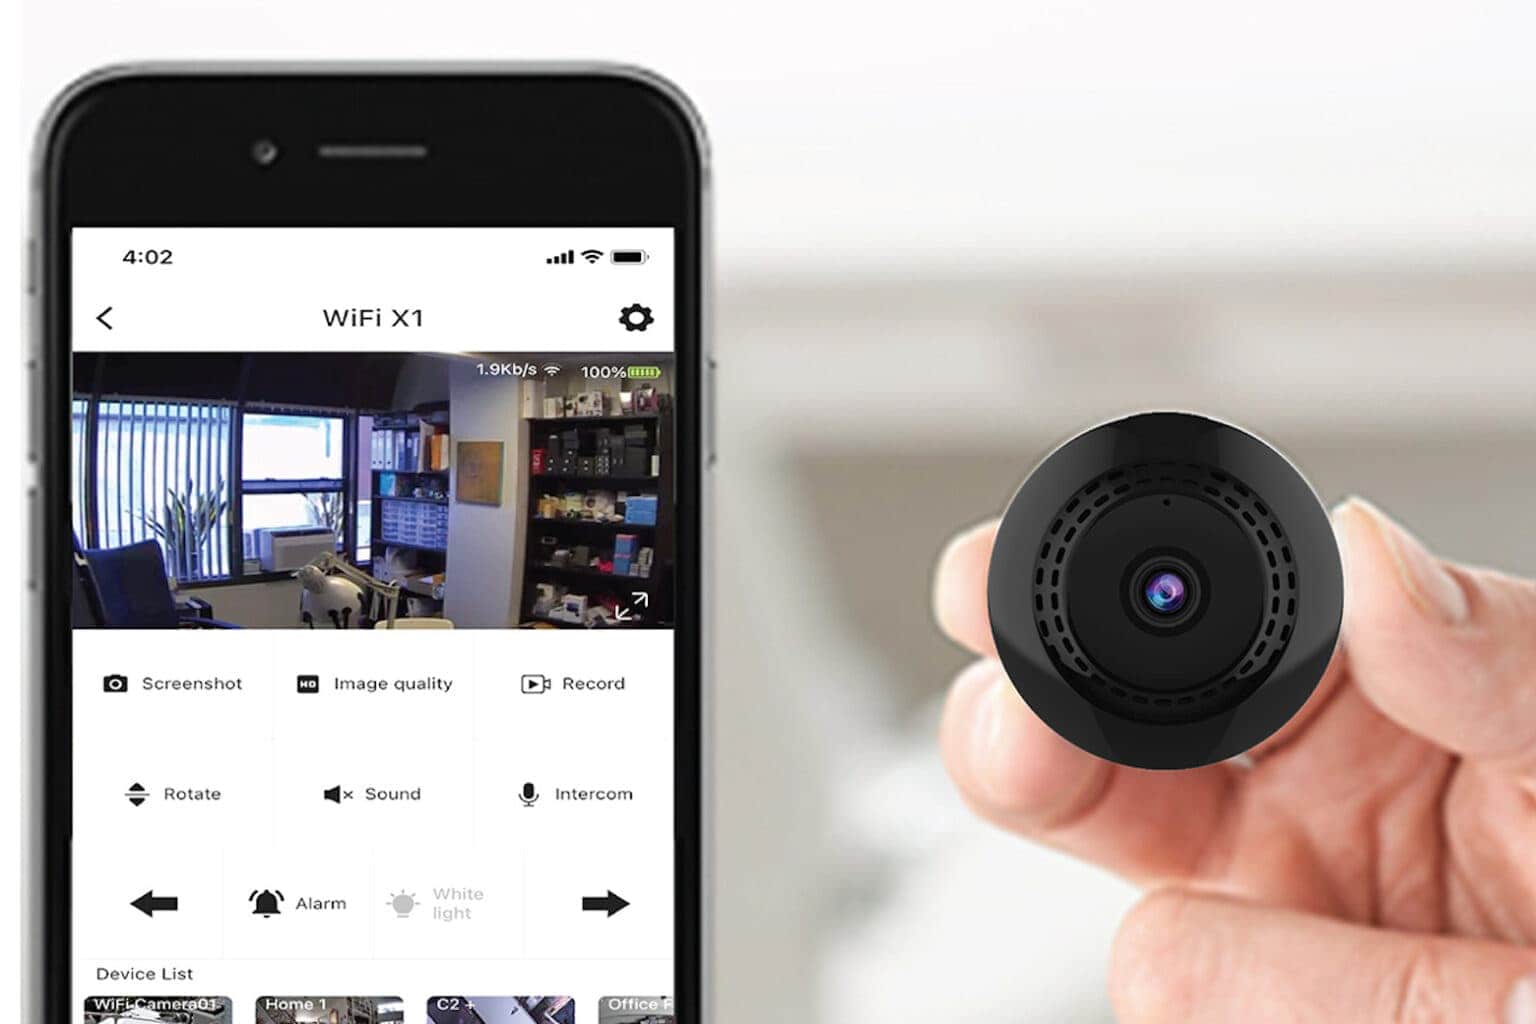 Tokk Cam 2+ bodycam, dashcam and home security cam is pictured being held in a hand, alongside the iPhone app that works with it.